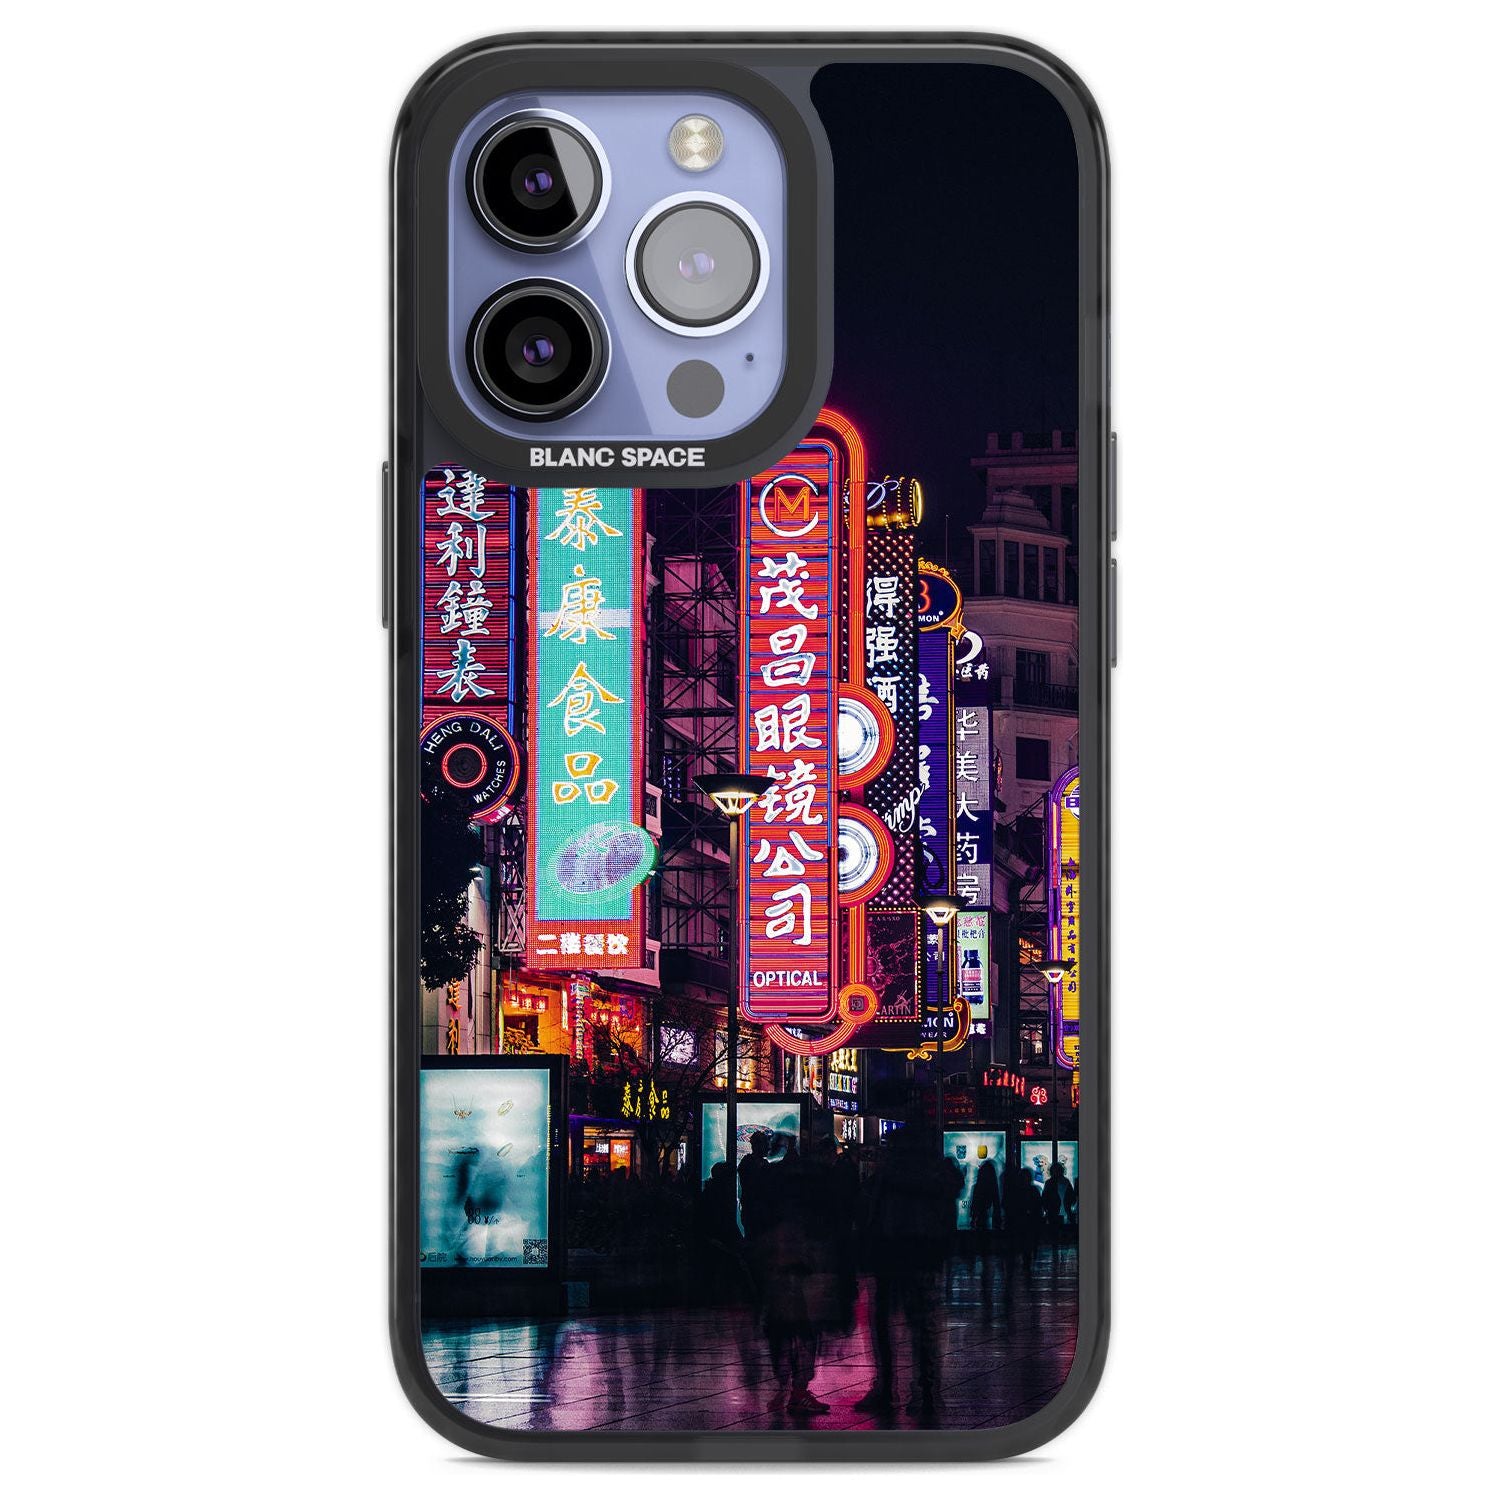 Busy Street - Neon Cities Photographs Phone Case iPhone 13 Pro / Black Impact Case,iPhone 14 Pro / Black Impact Case,iPhone 15 Pro Max / Black Impact Case,iPhone 15 Pro / Black Impact Case Blanc Space